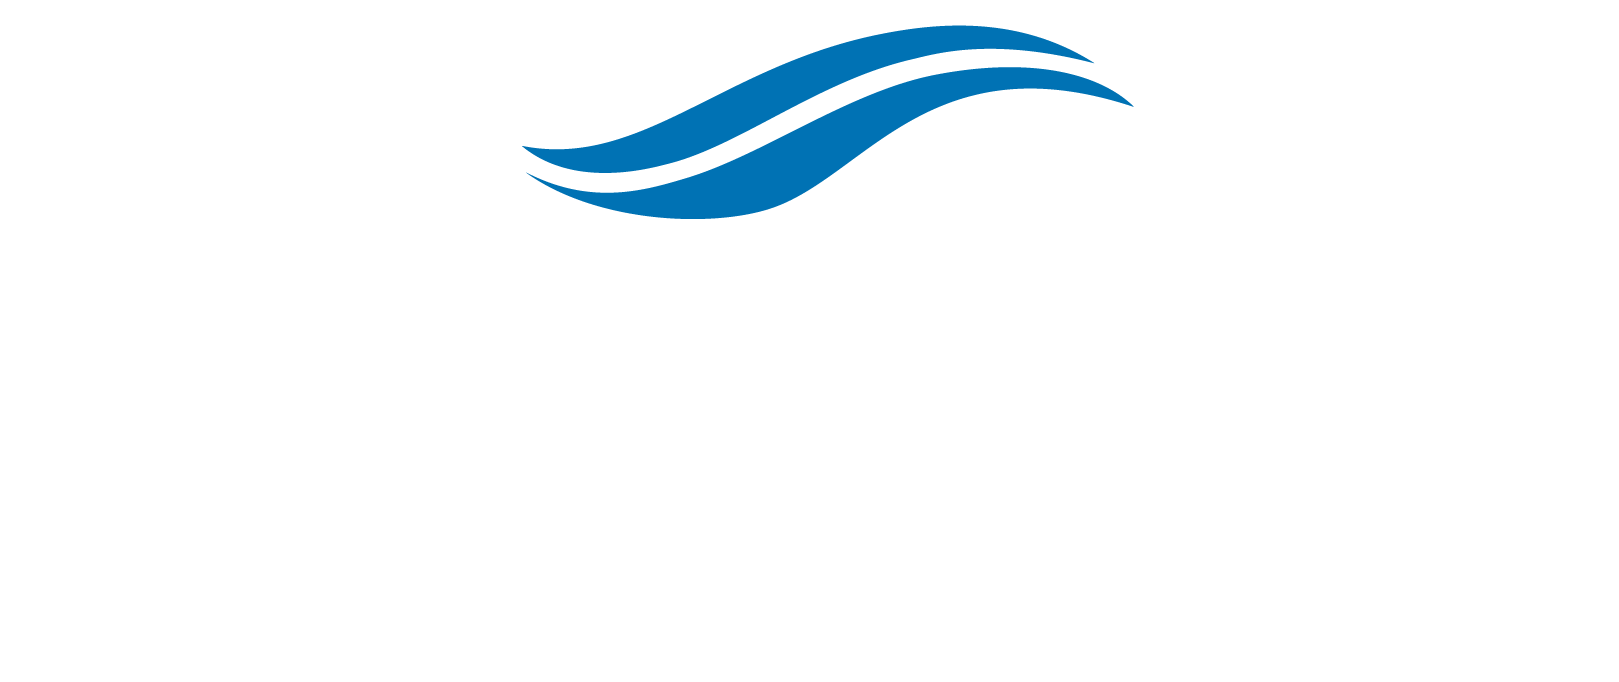 Sterling Water Treatment